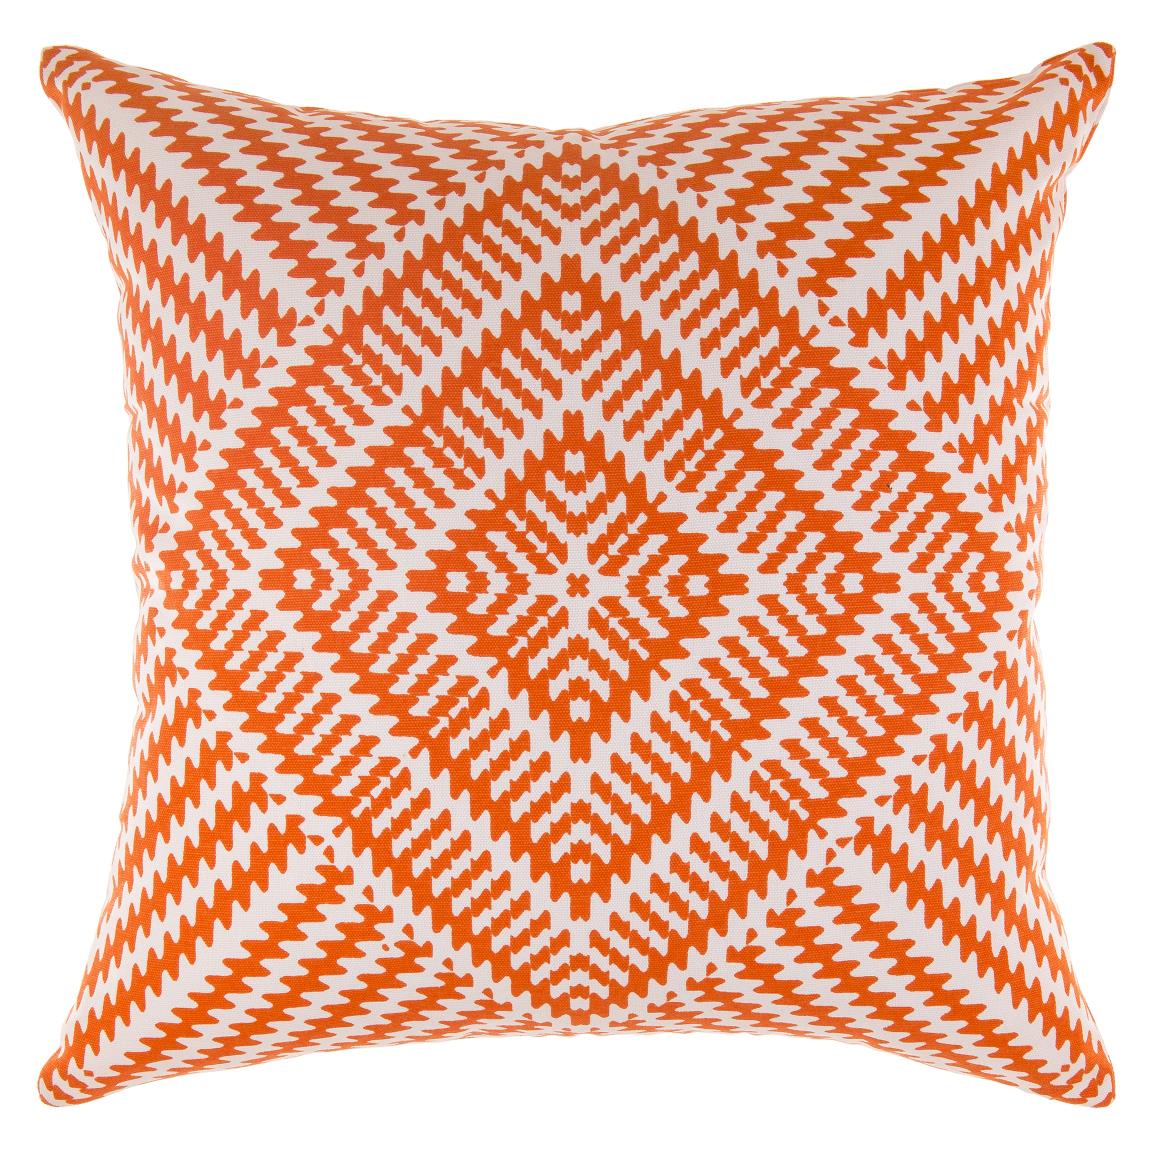 Kaleidoscope Accent Decorative Throw Pillow Covers (Pack of 2) - TreeWool